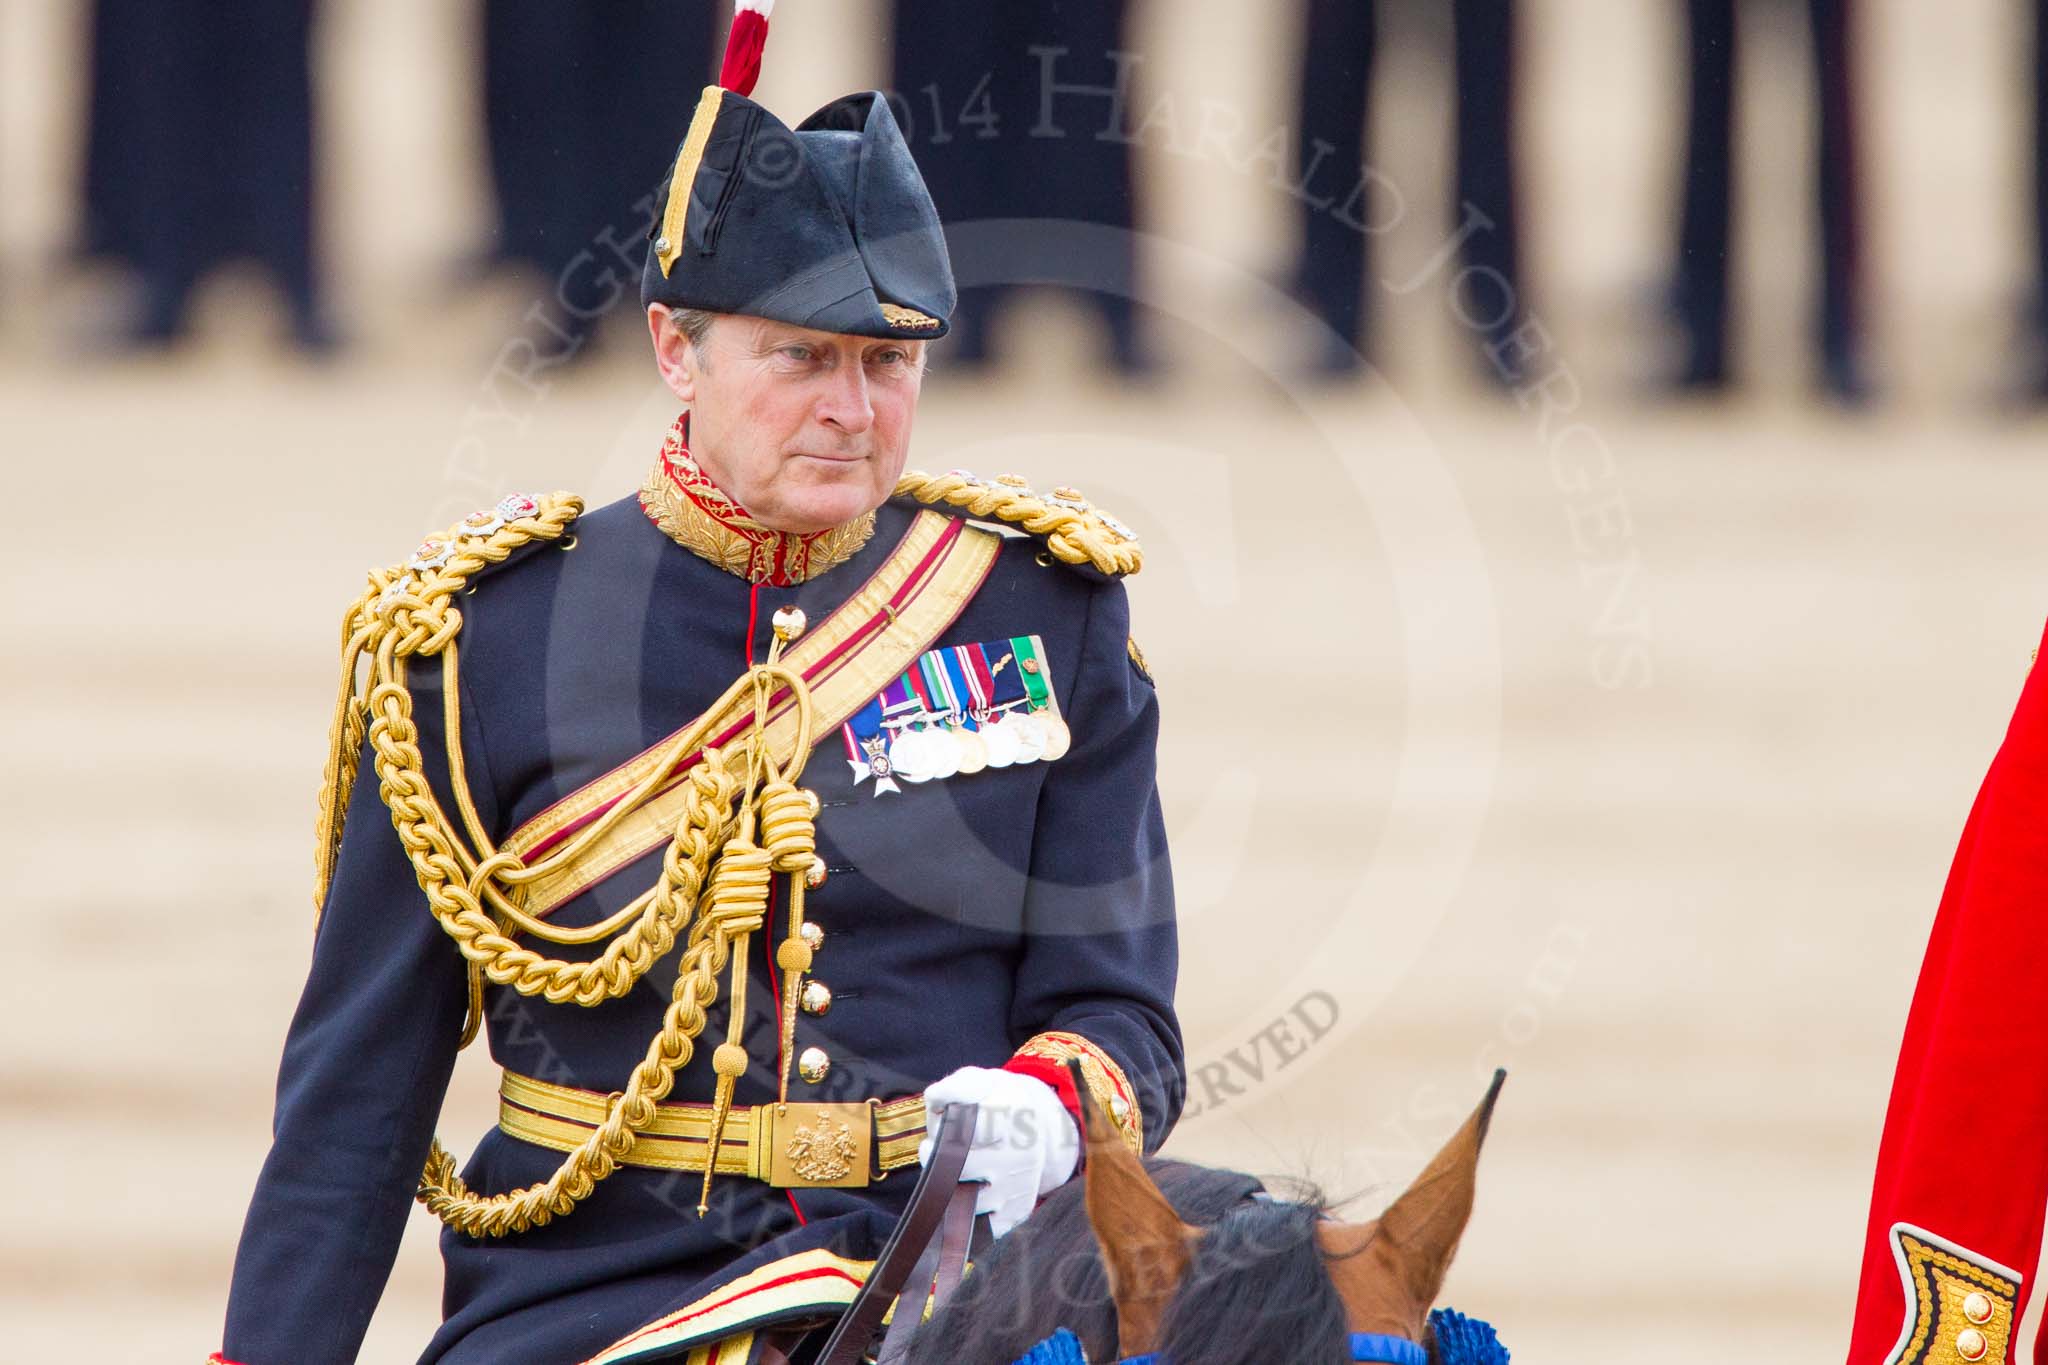 Trooping the Colour 2014.
Horse Guards Parade, Westminster,
London SW1A,

United Kingdom,
on 14 June 2014 at 11:07, image #436